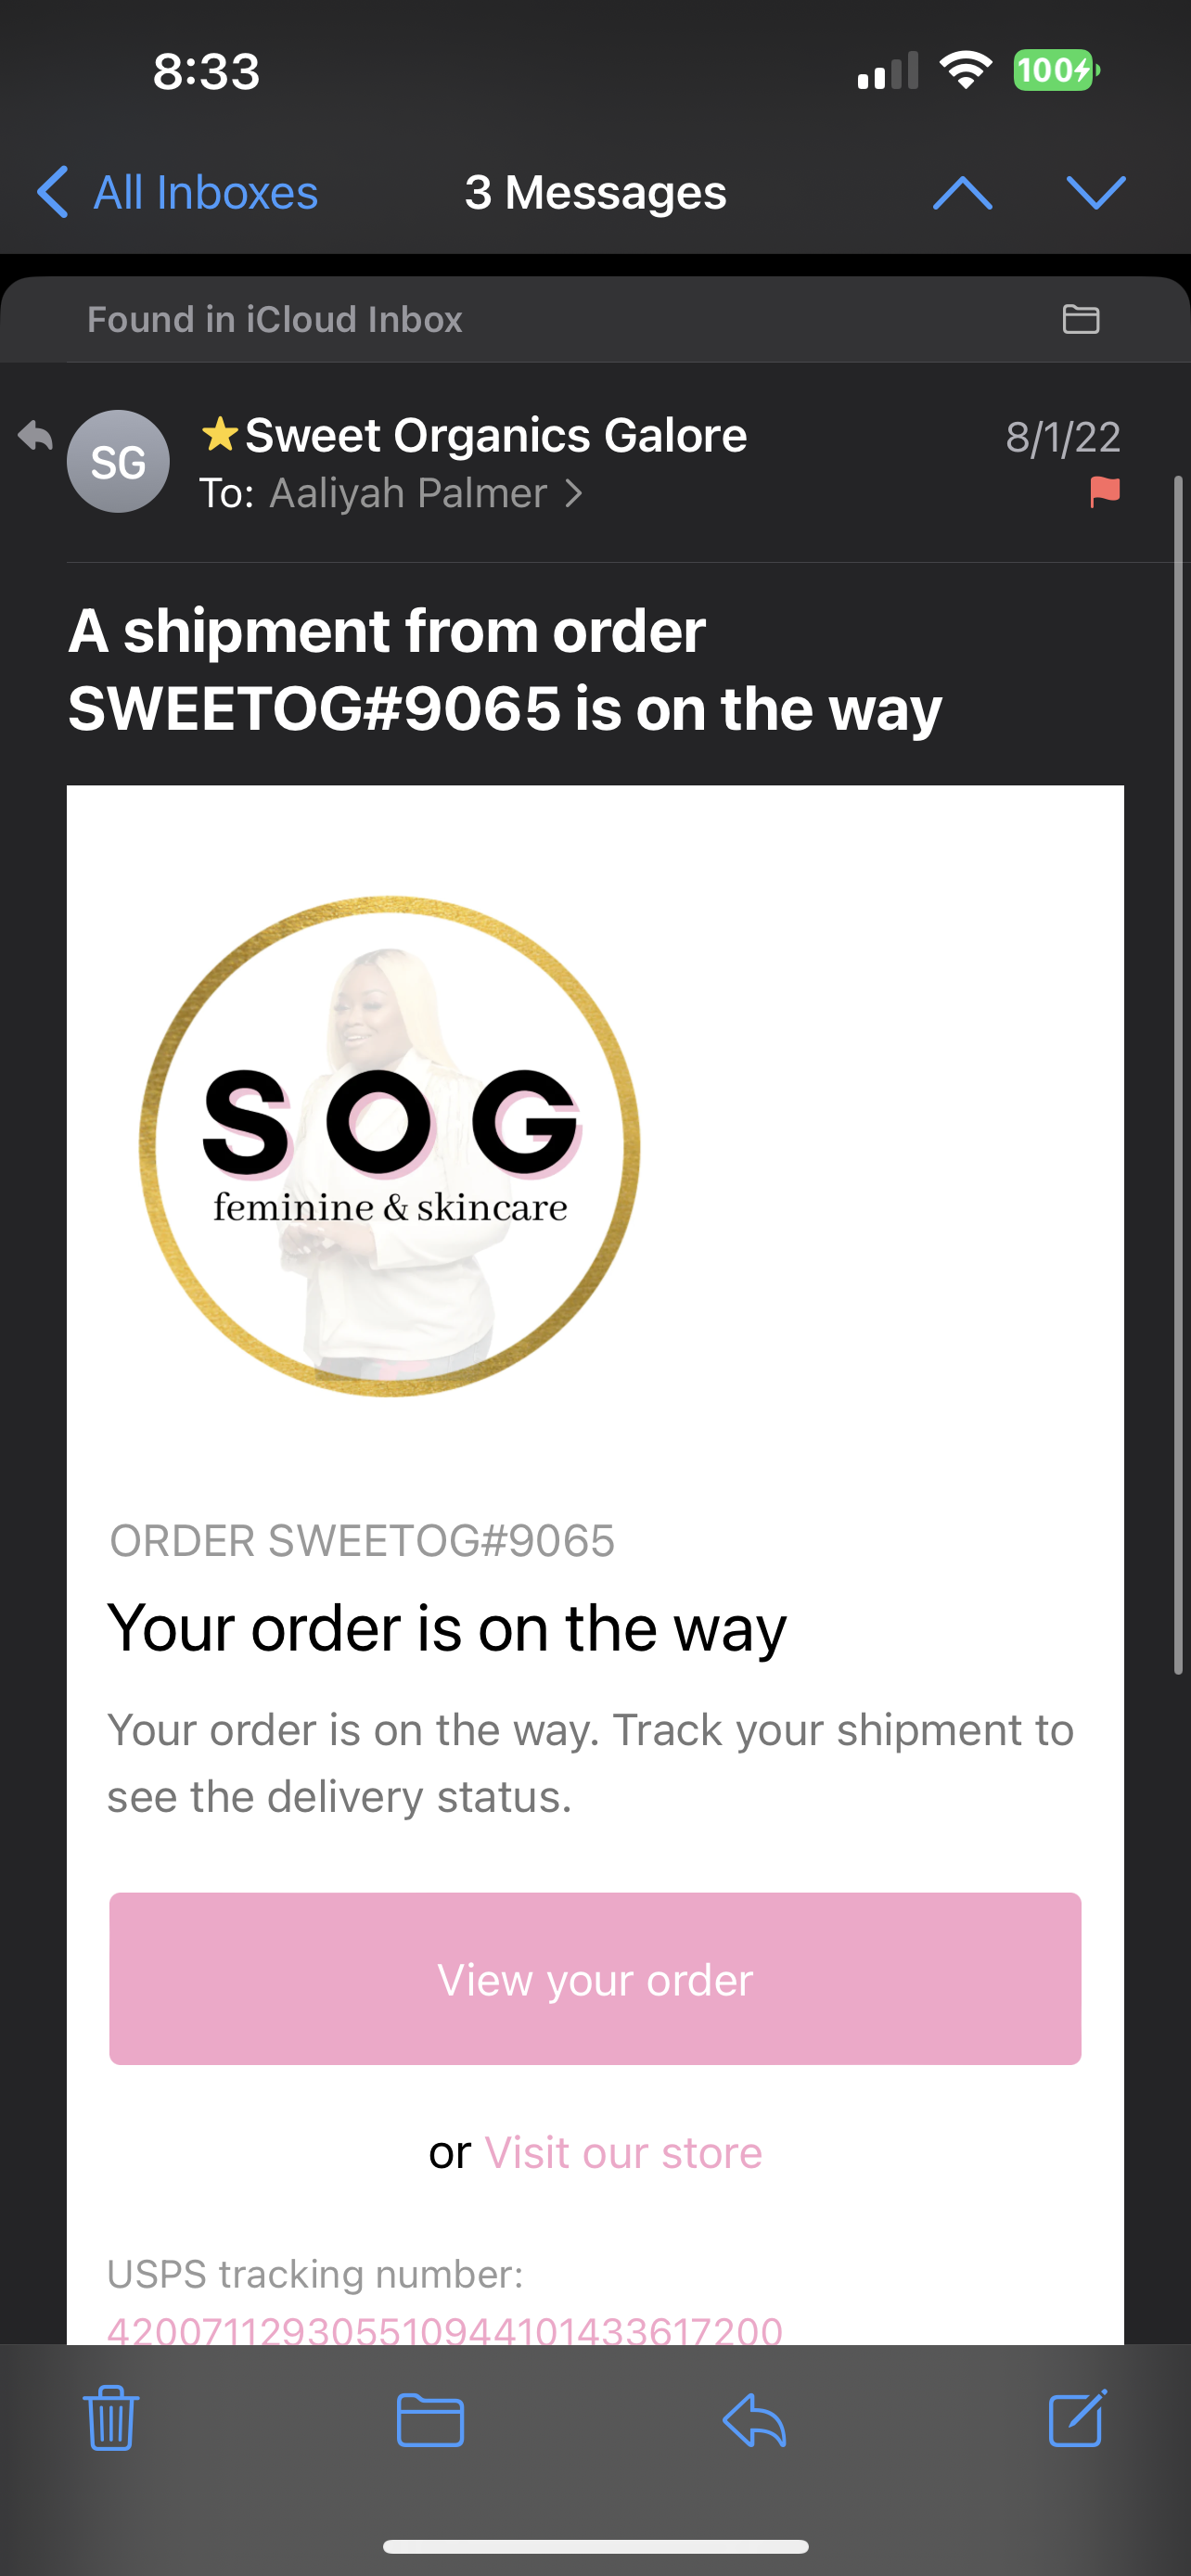 About my order 